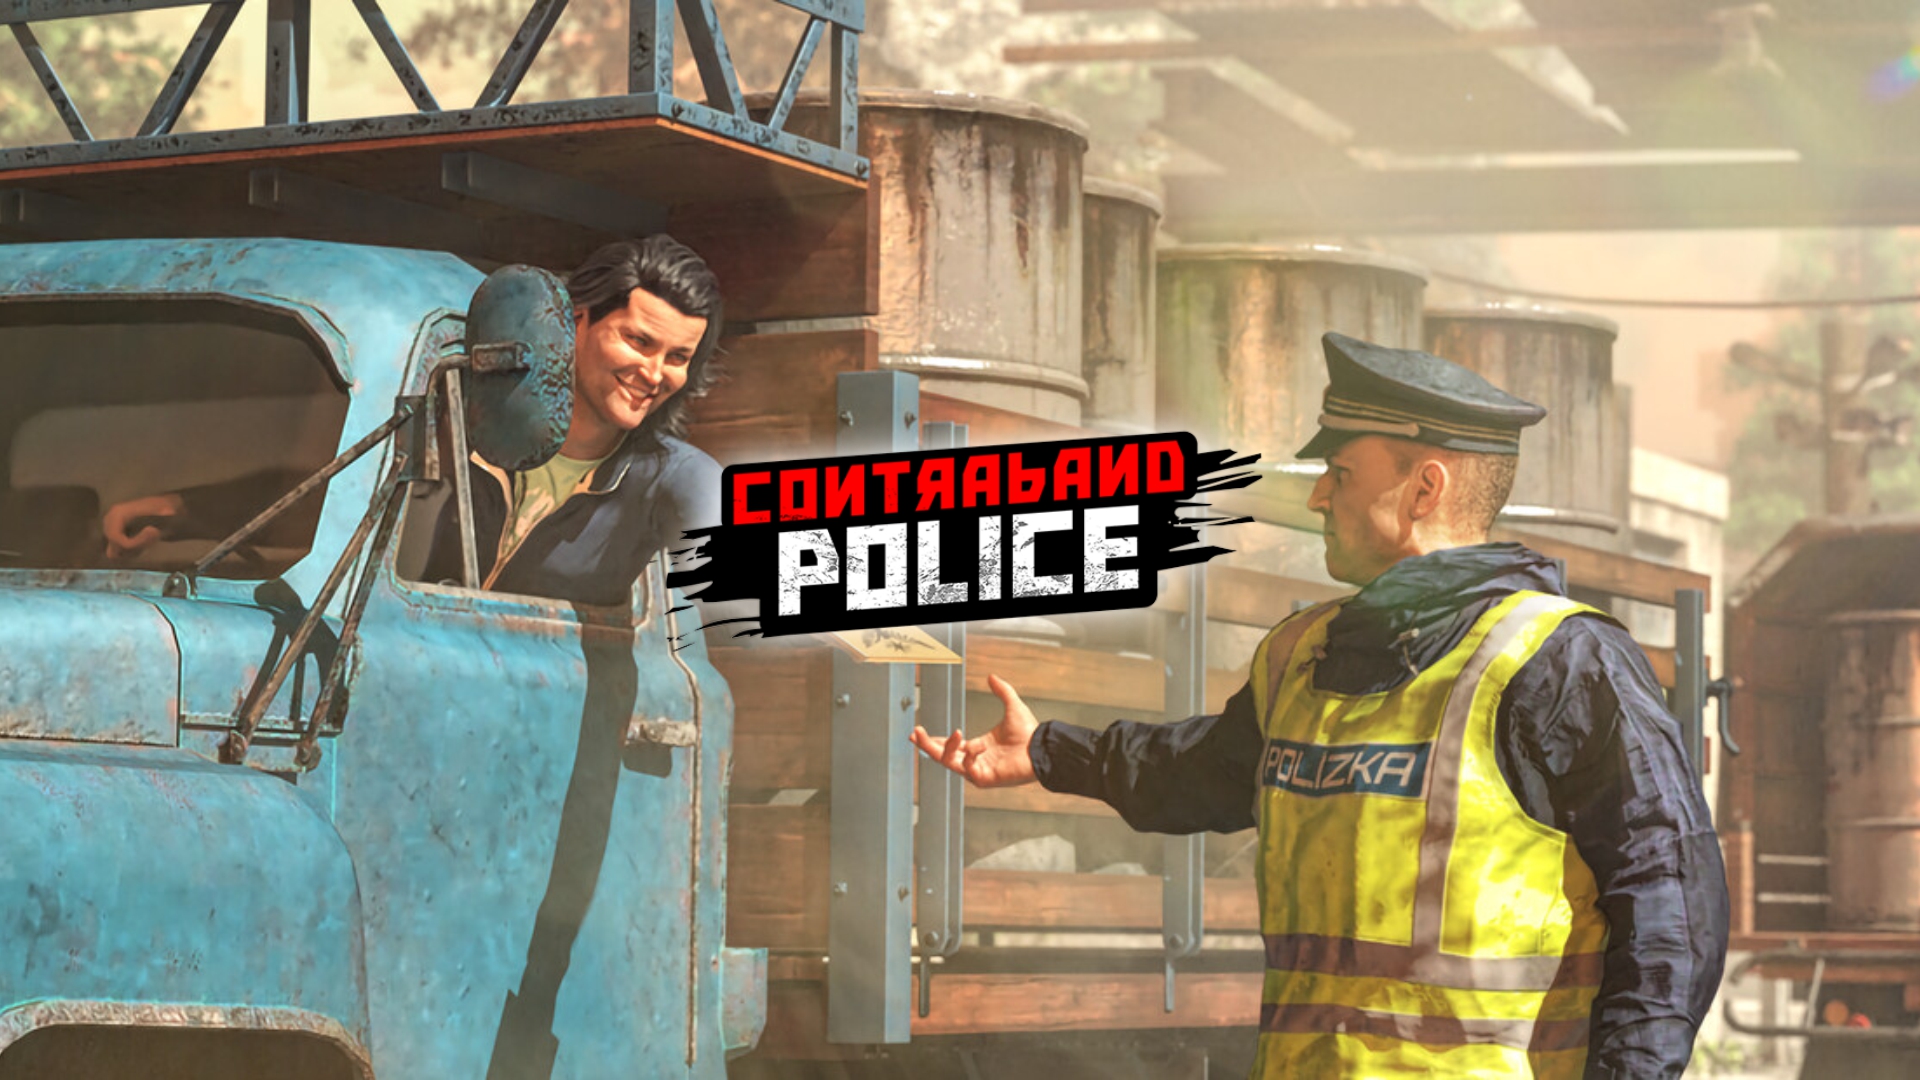 PlayWay - Contraband Police release 8 march 2023 👮 Add to